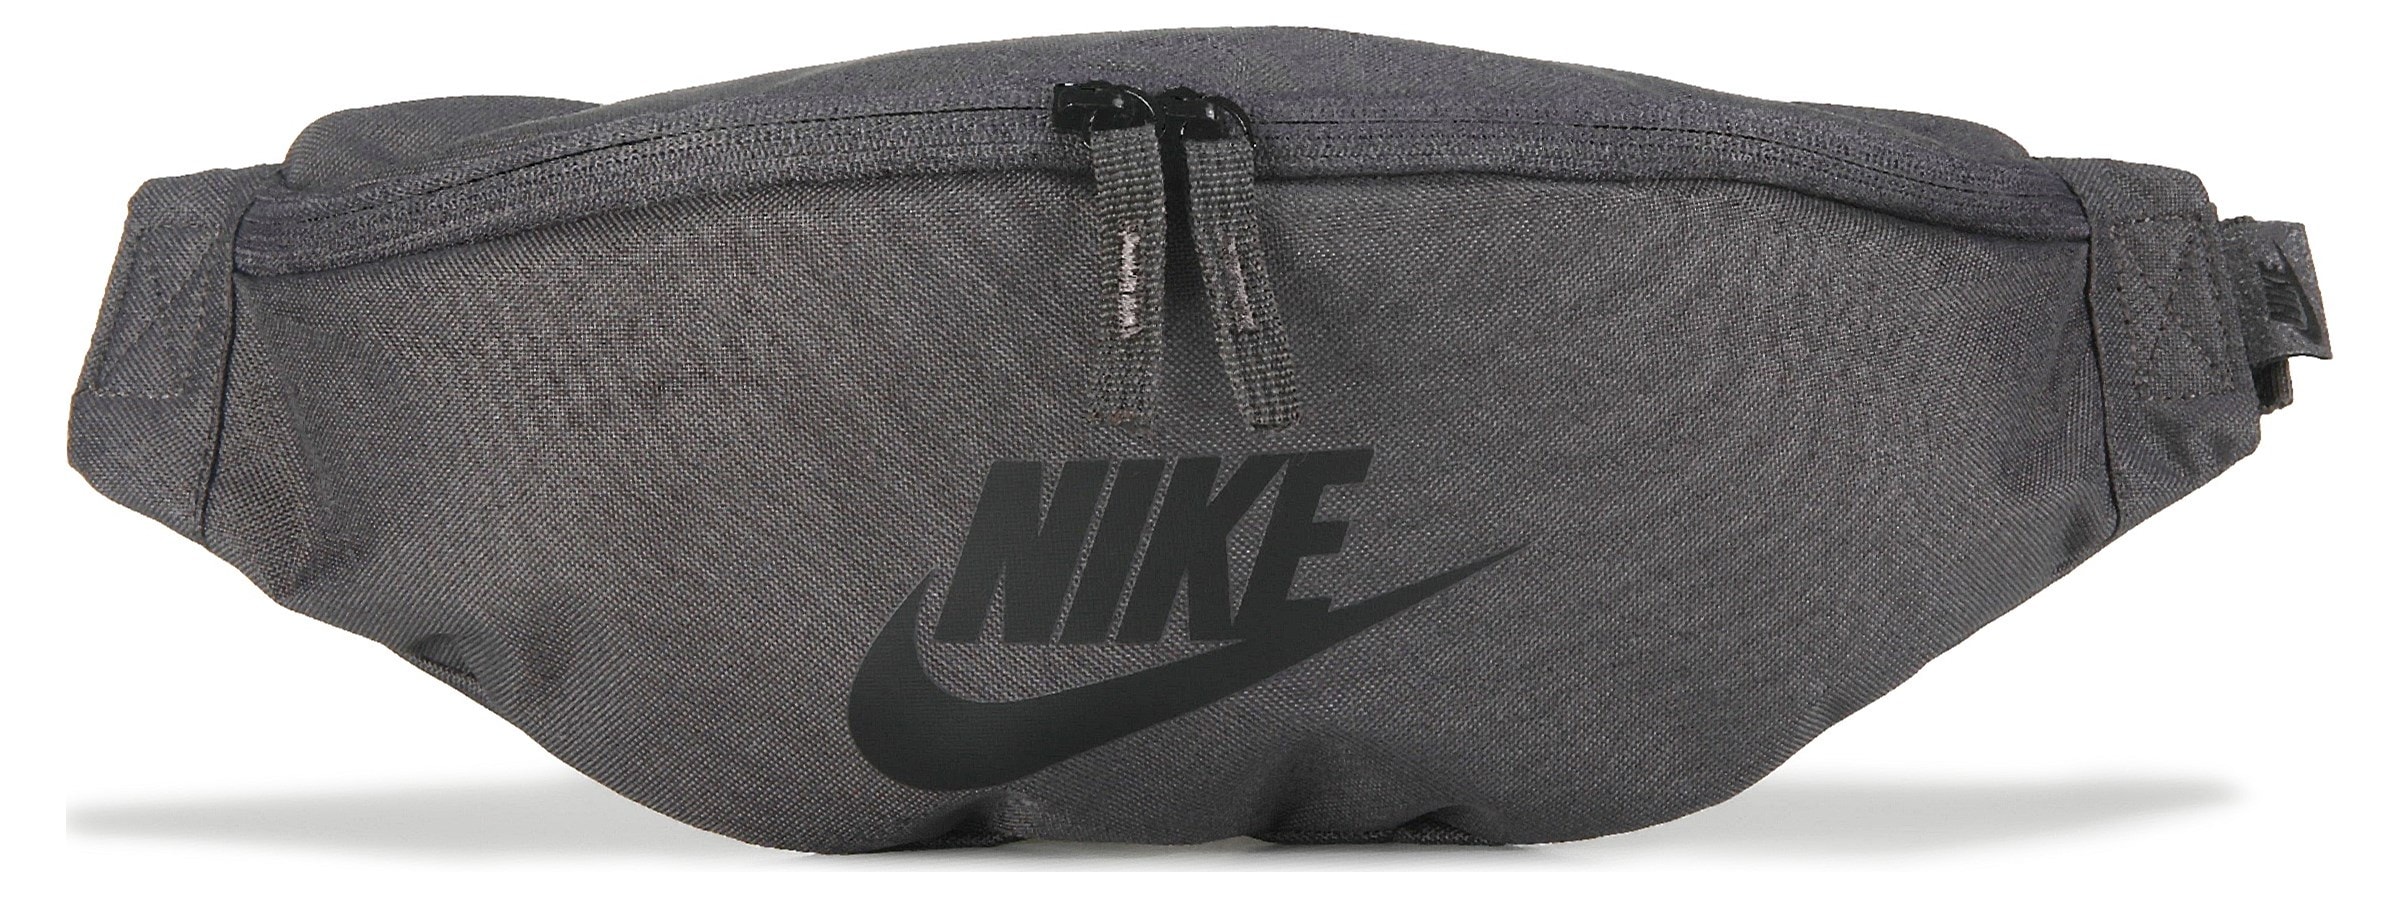 Fanny pack Nike Heritage - Bags - Equipment